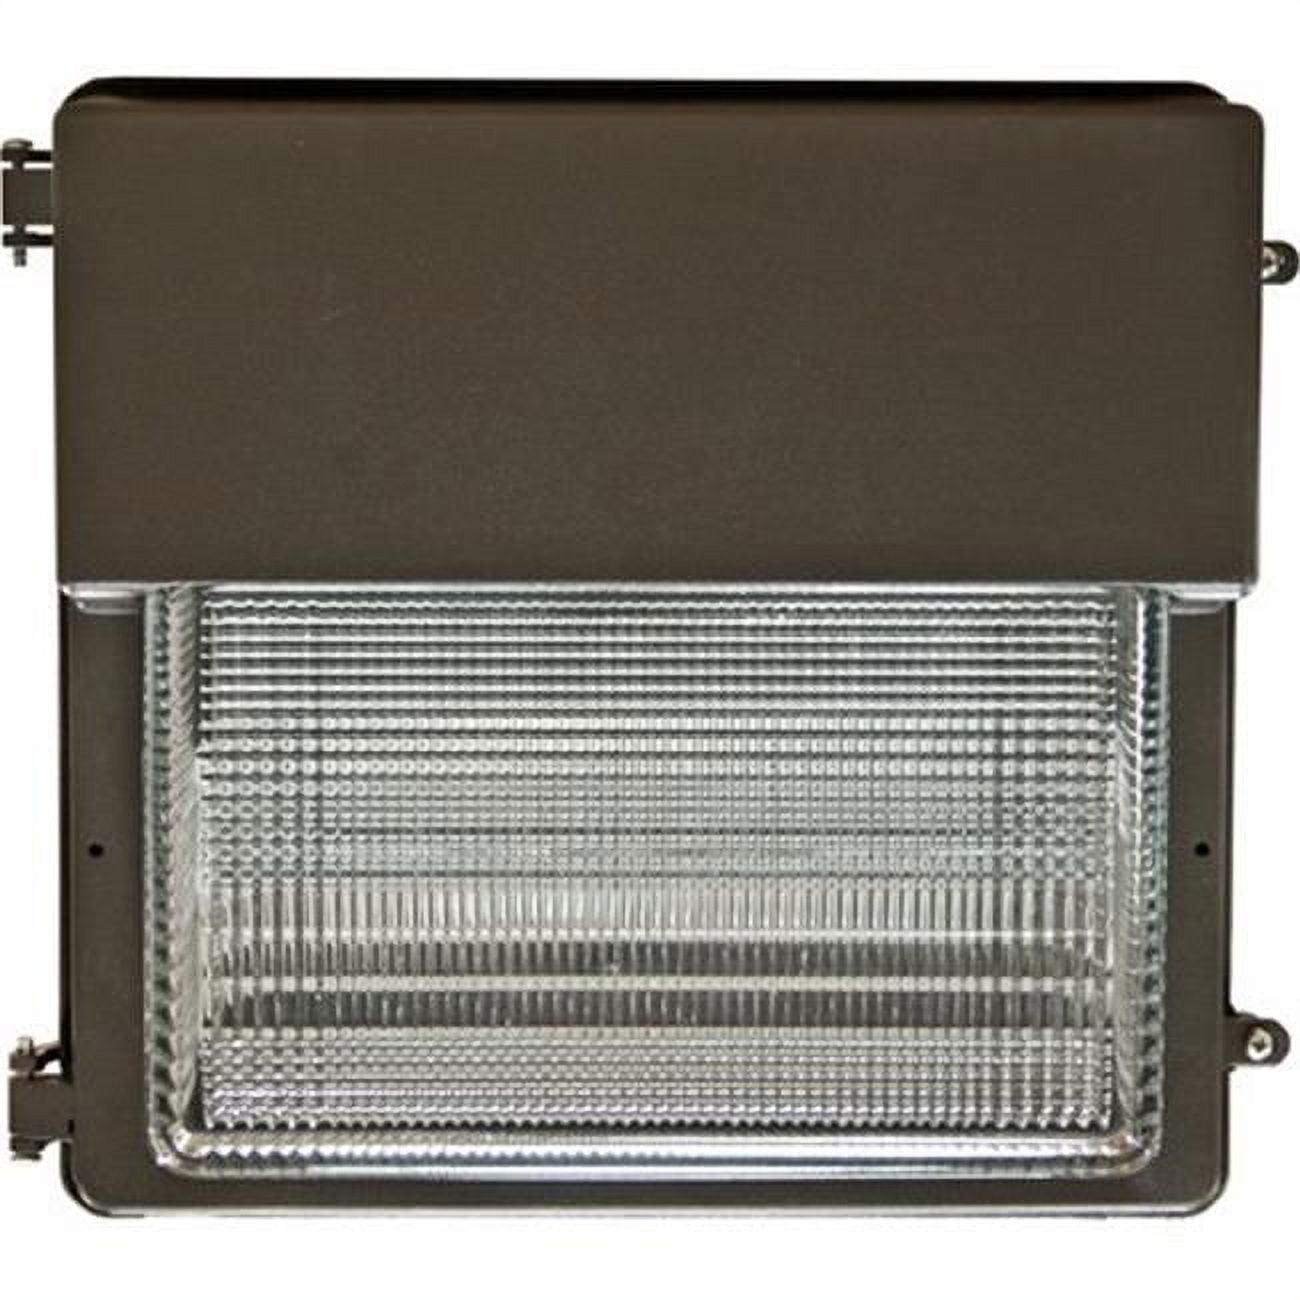 Dw1853-mt 14.75 X 15 X 9.88 In. 400 Watts Large Wall Pack Fixture With Metal Halide Lamp, Bronze